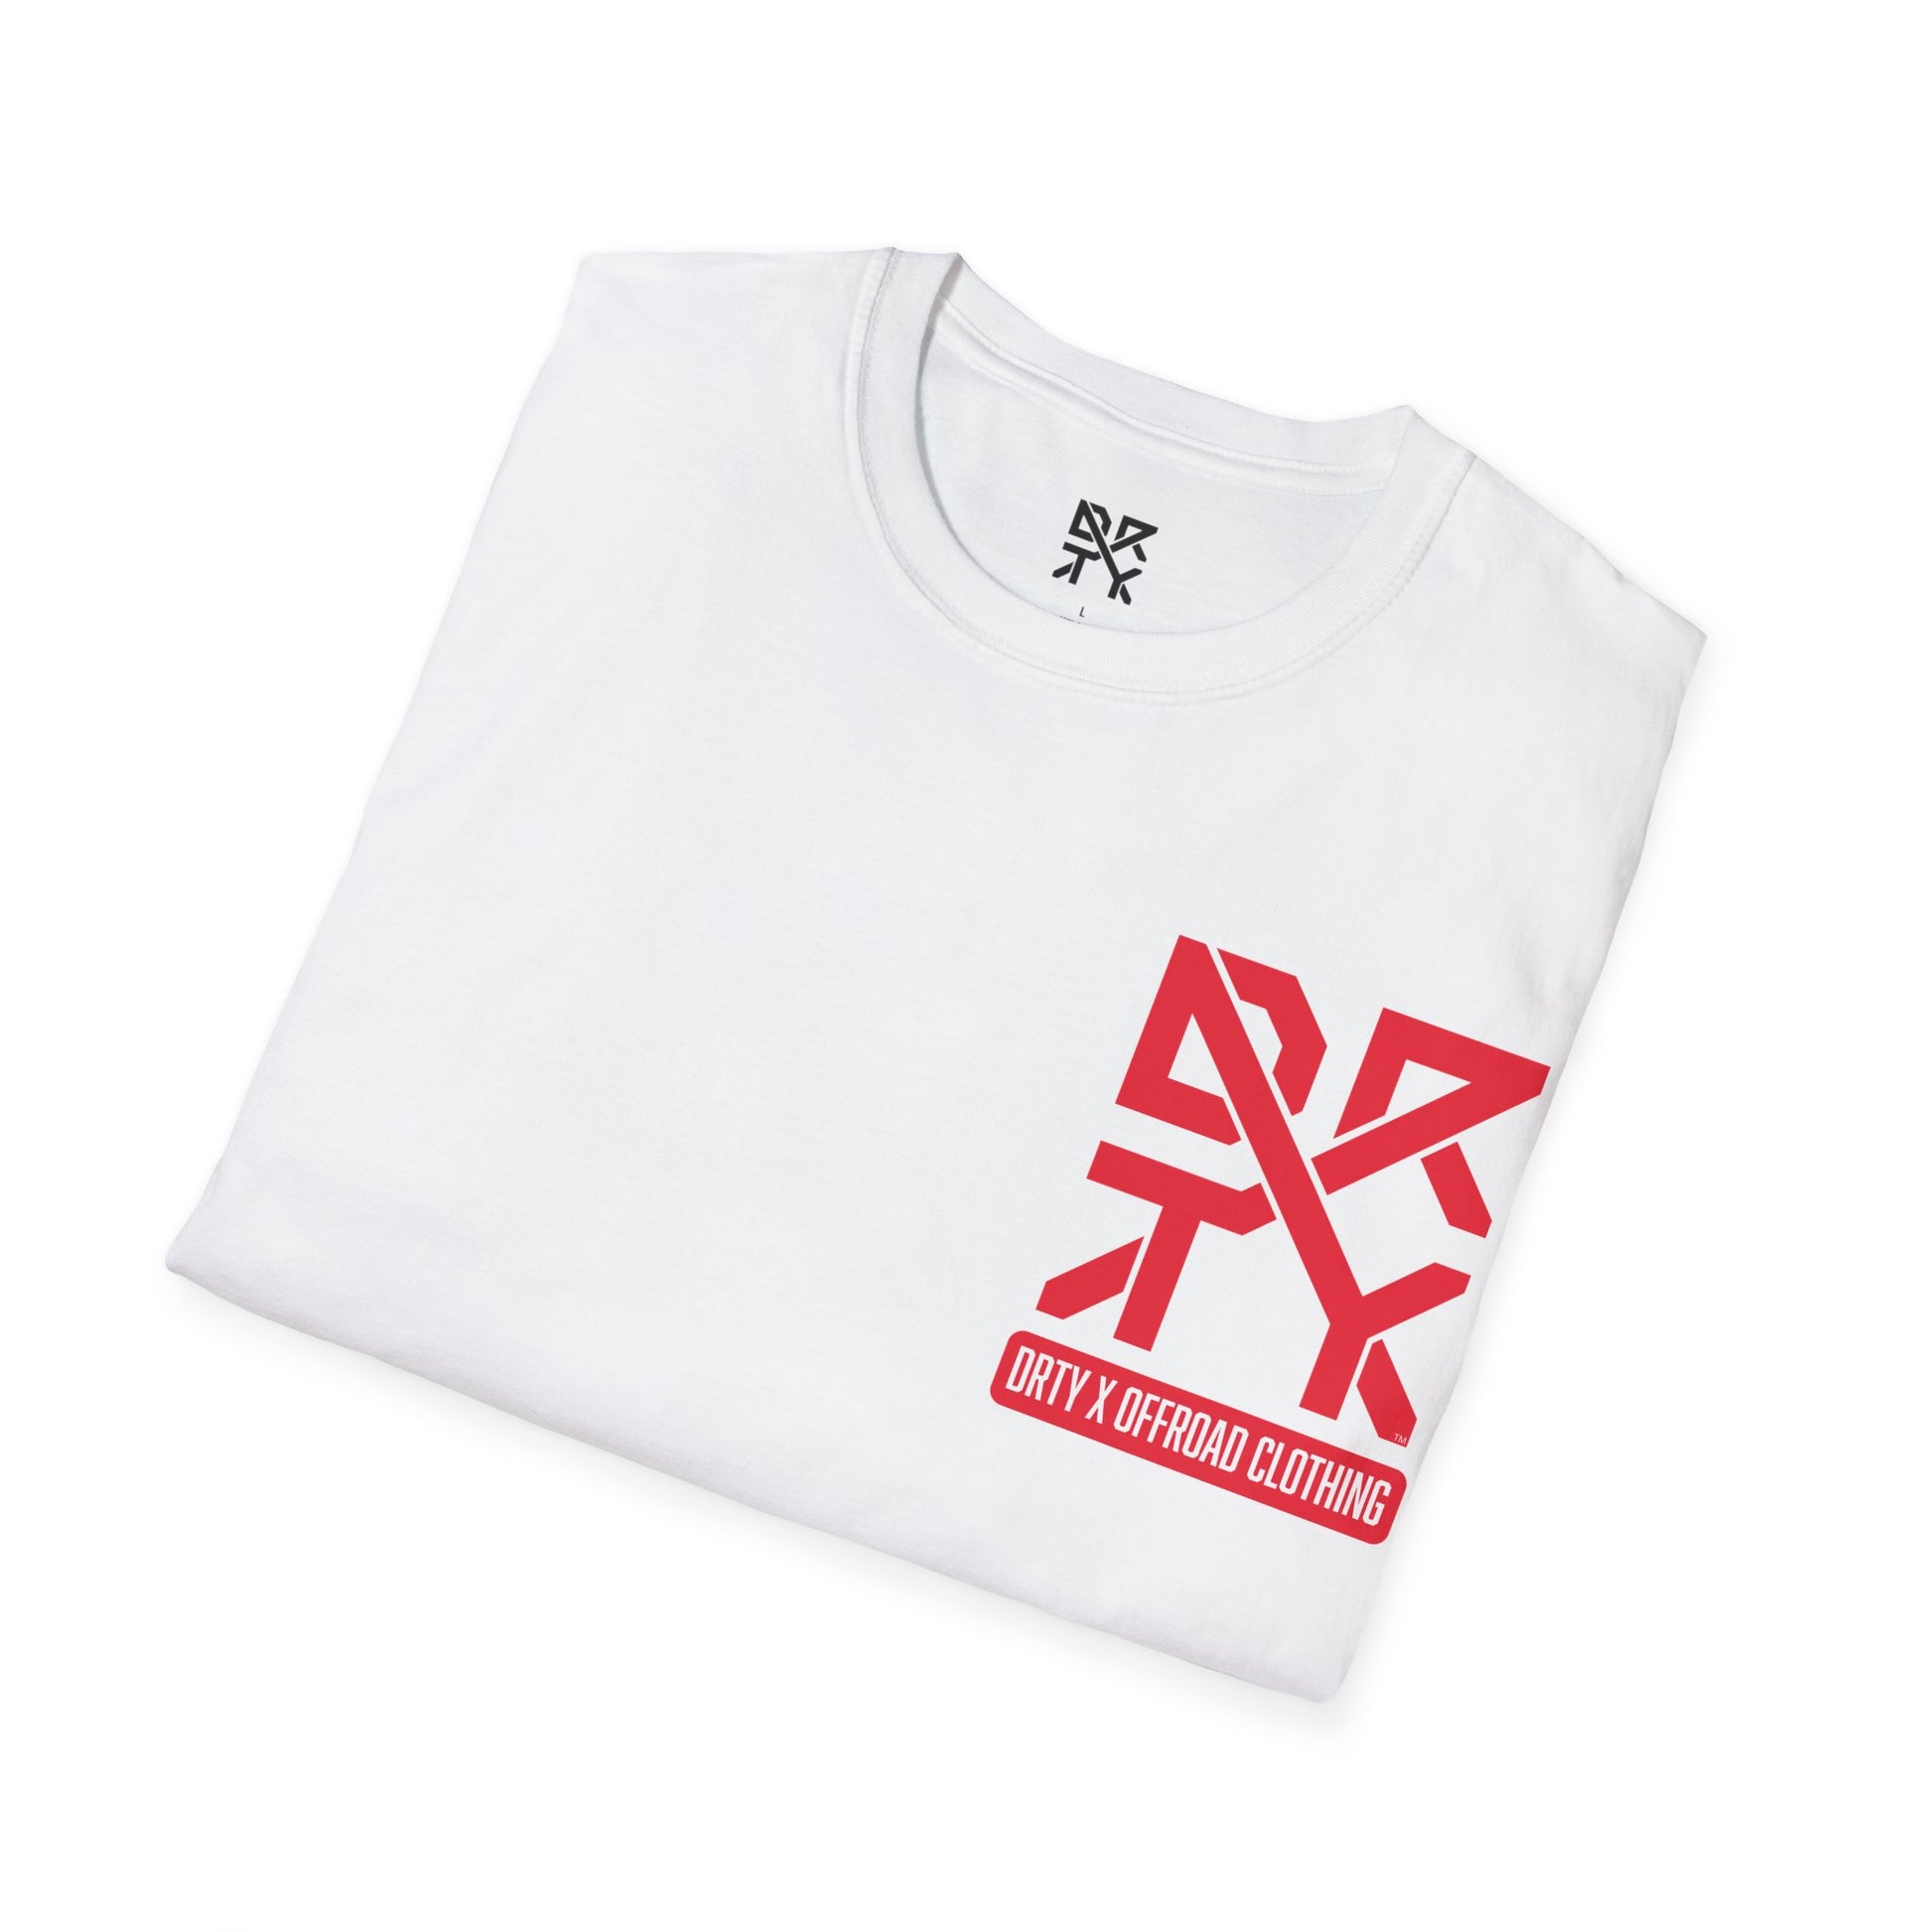 This image showcases a folded view of a T-shirt collar and left front chest with a DRTY X logo printed in both locations.